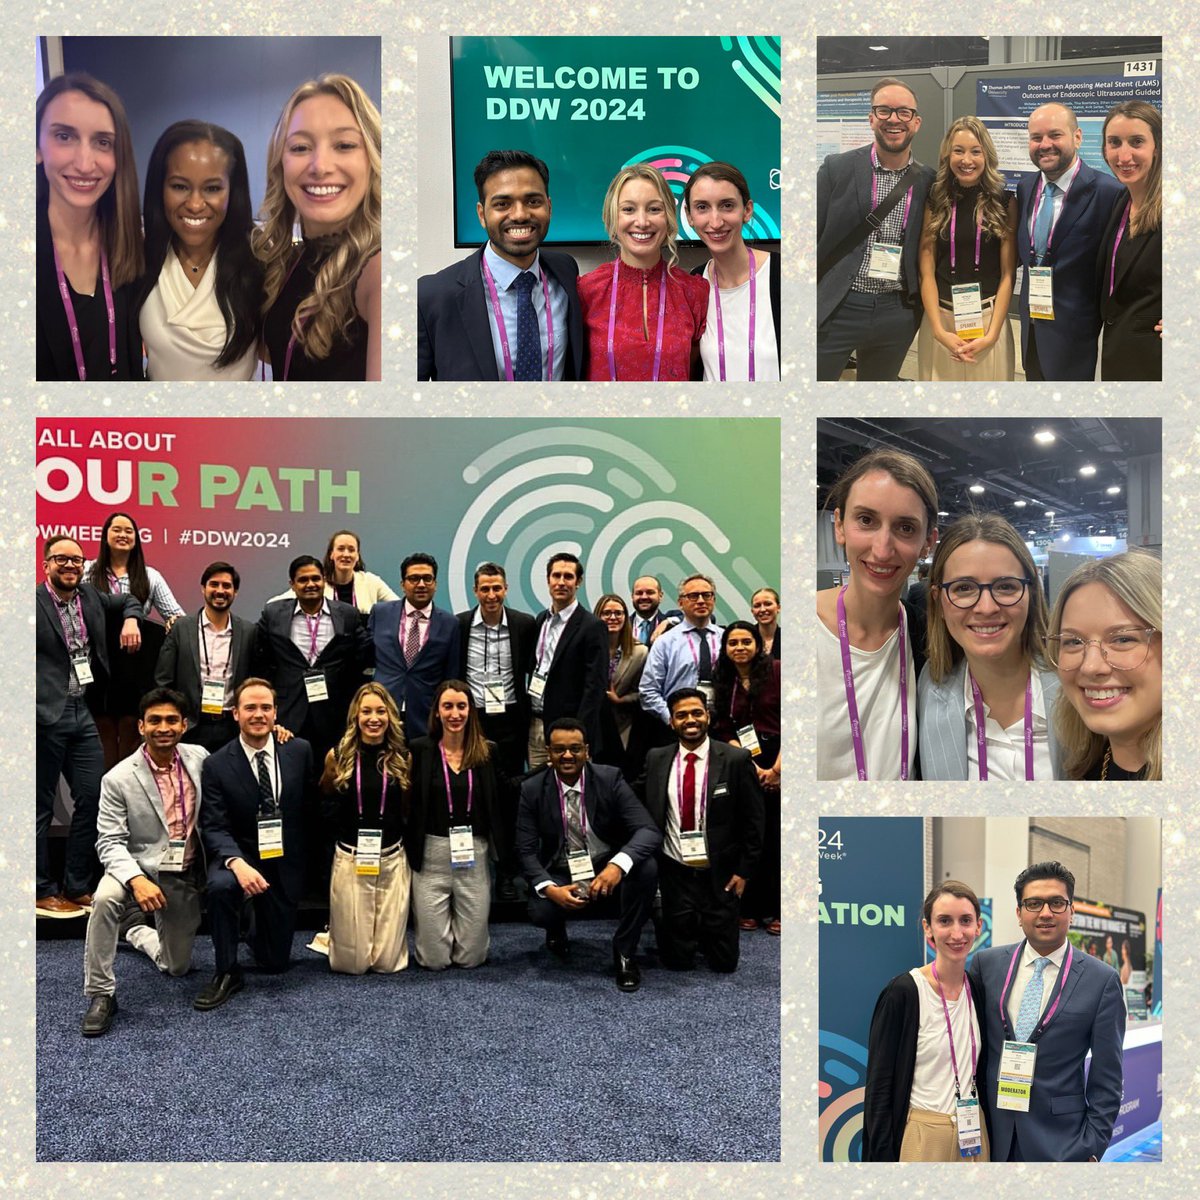 #DDW2024 came and went way too quickly with way too many highlights to share. Thankful to connect with so many incredible people and learn so much about my favorite topic! 📚💩 @UMN_GIHep @umnmedresidency